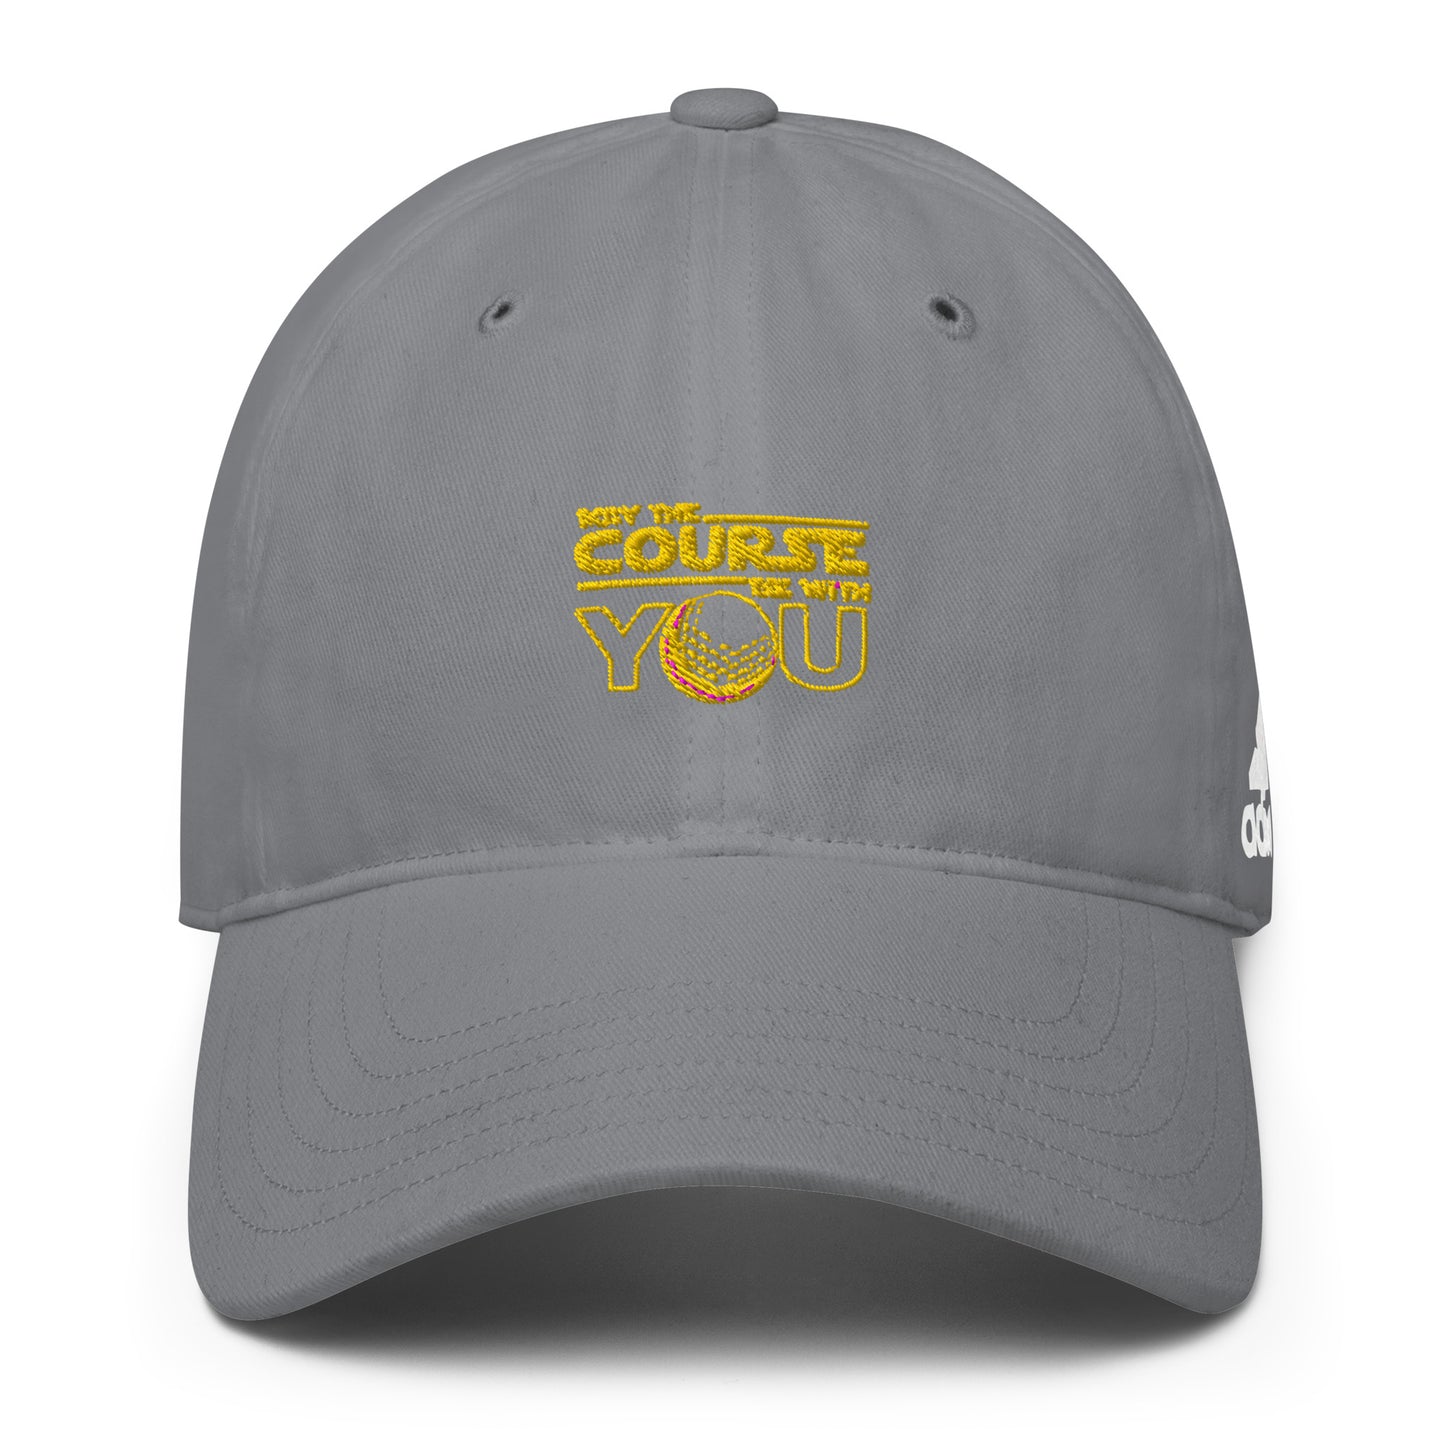 Adidas 'May The Course Be With You' Performance Golf Cap